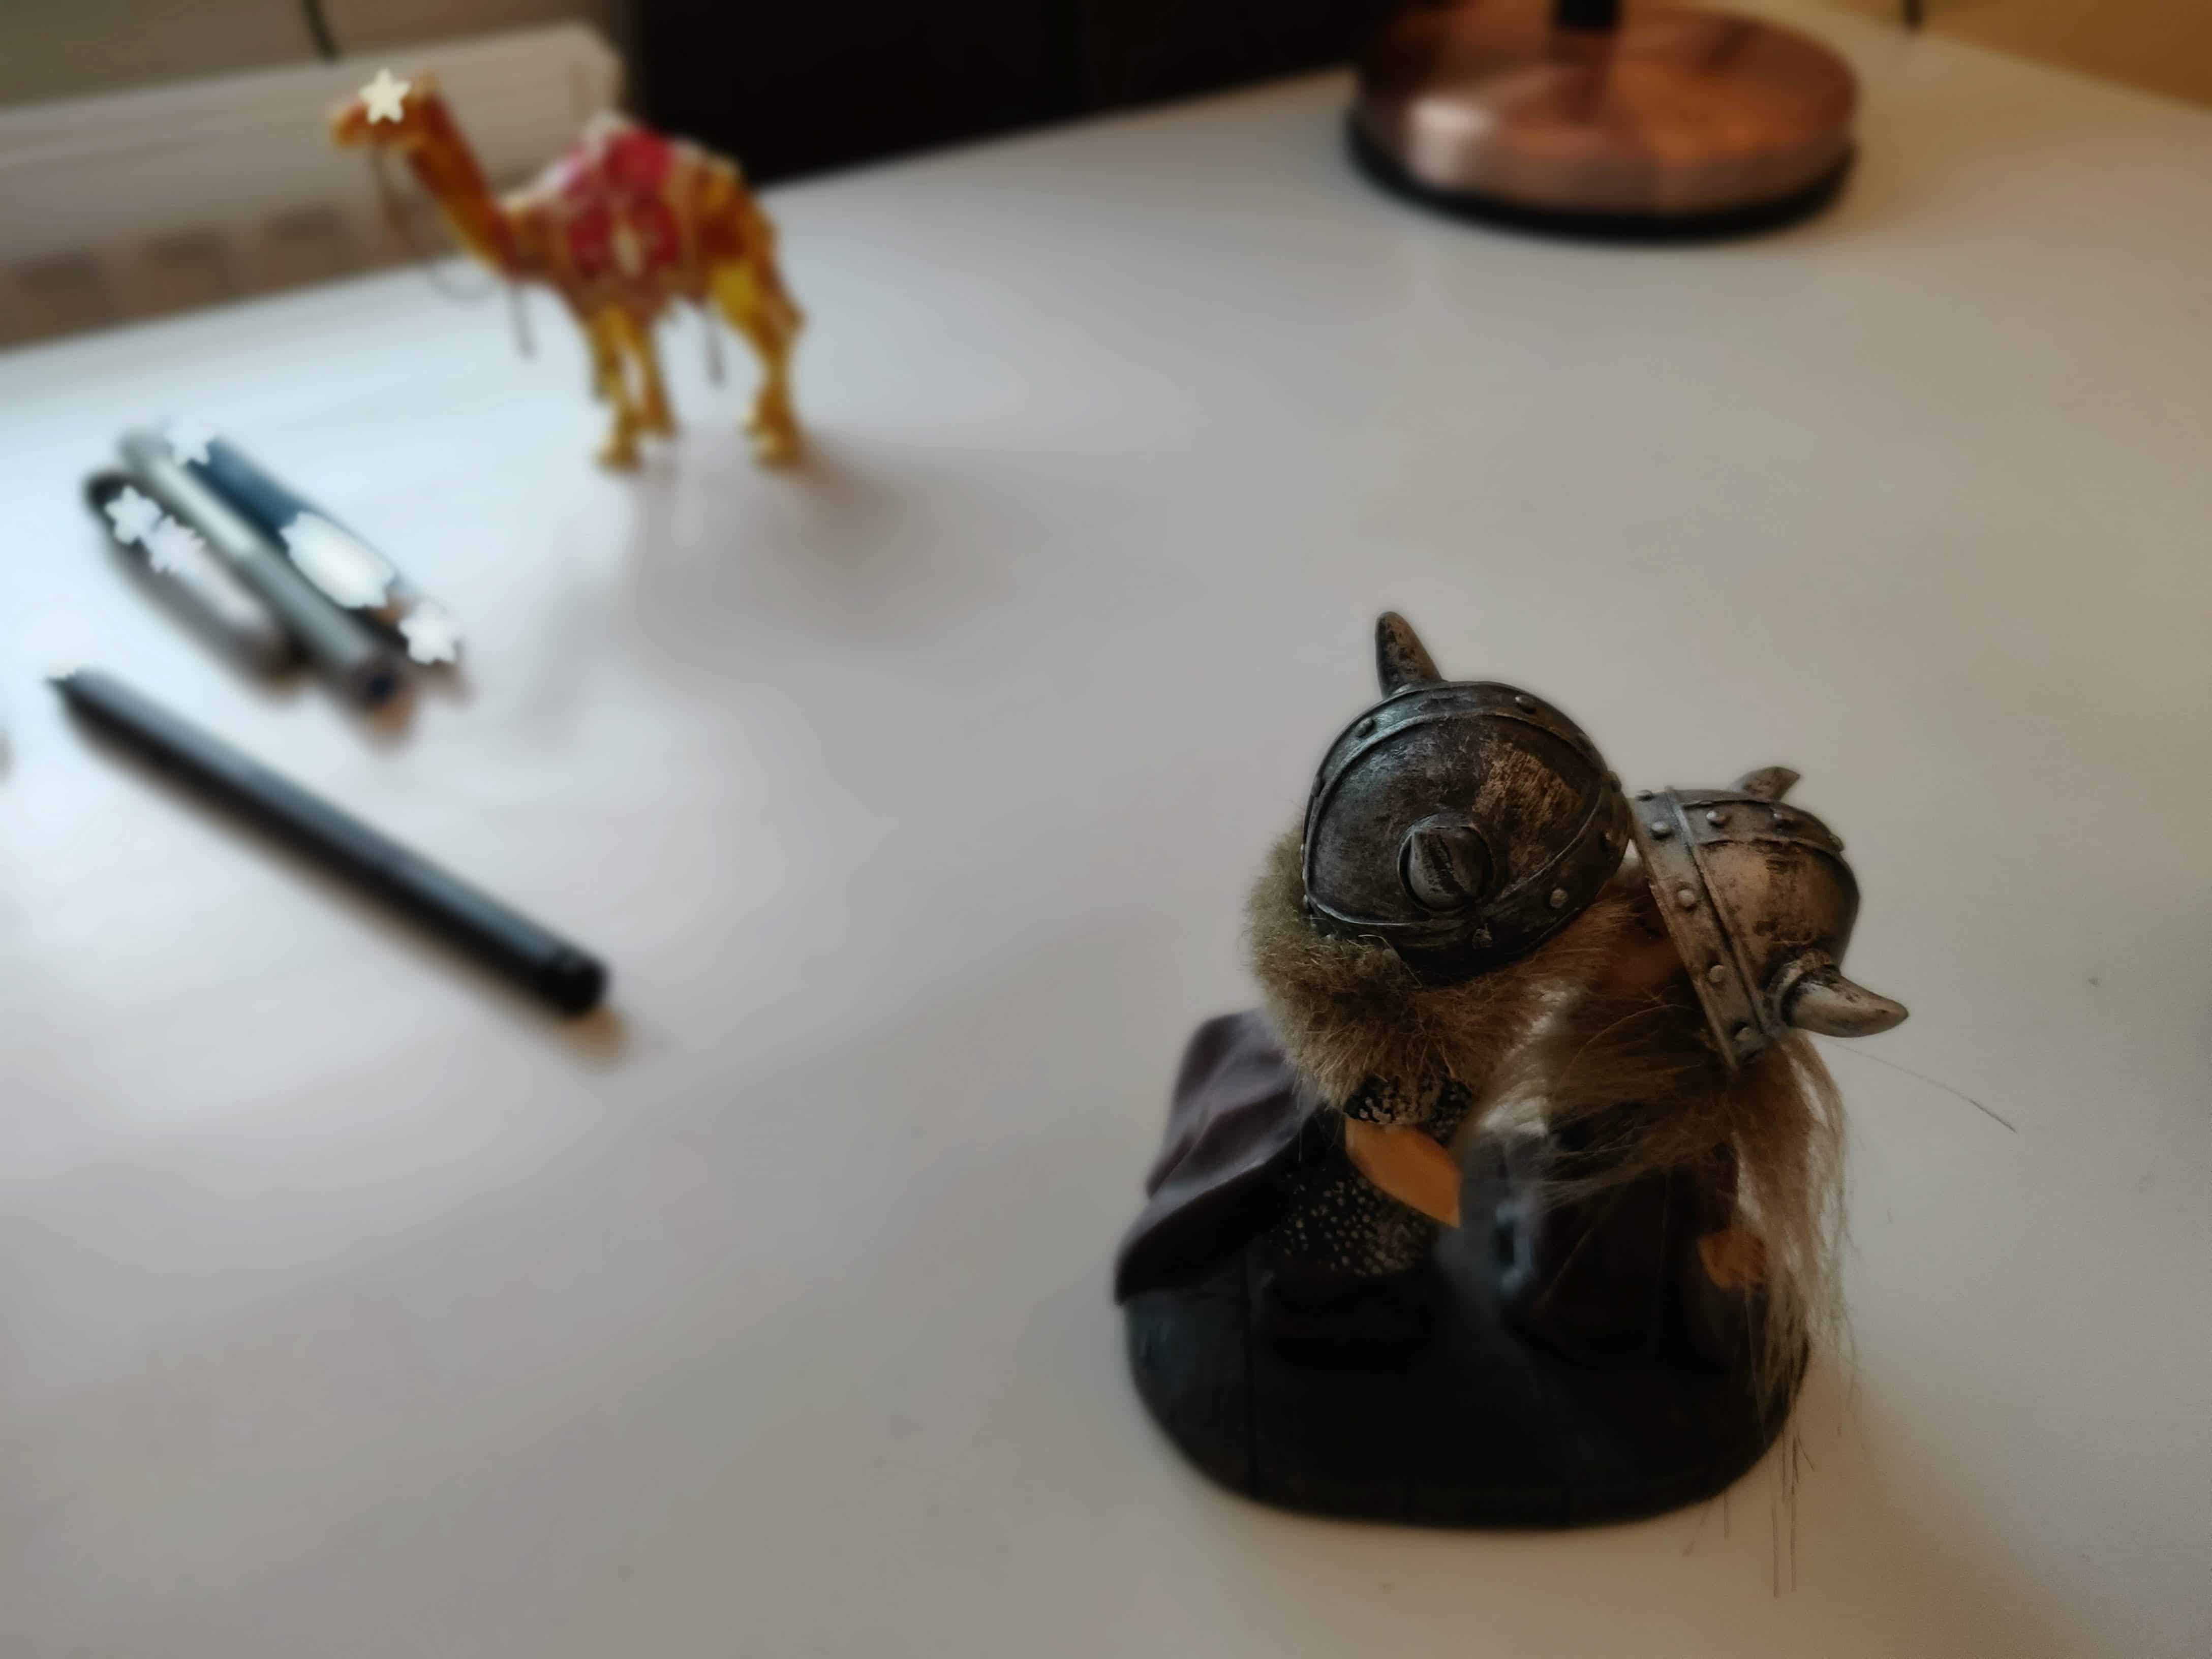 Figurine on a desk of two trolls kissing, with blurred pens and other items on the desk behind. White stars overlaid on pens and camel figurine.